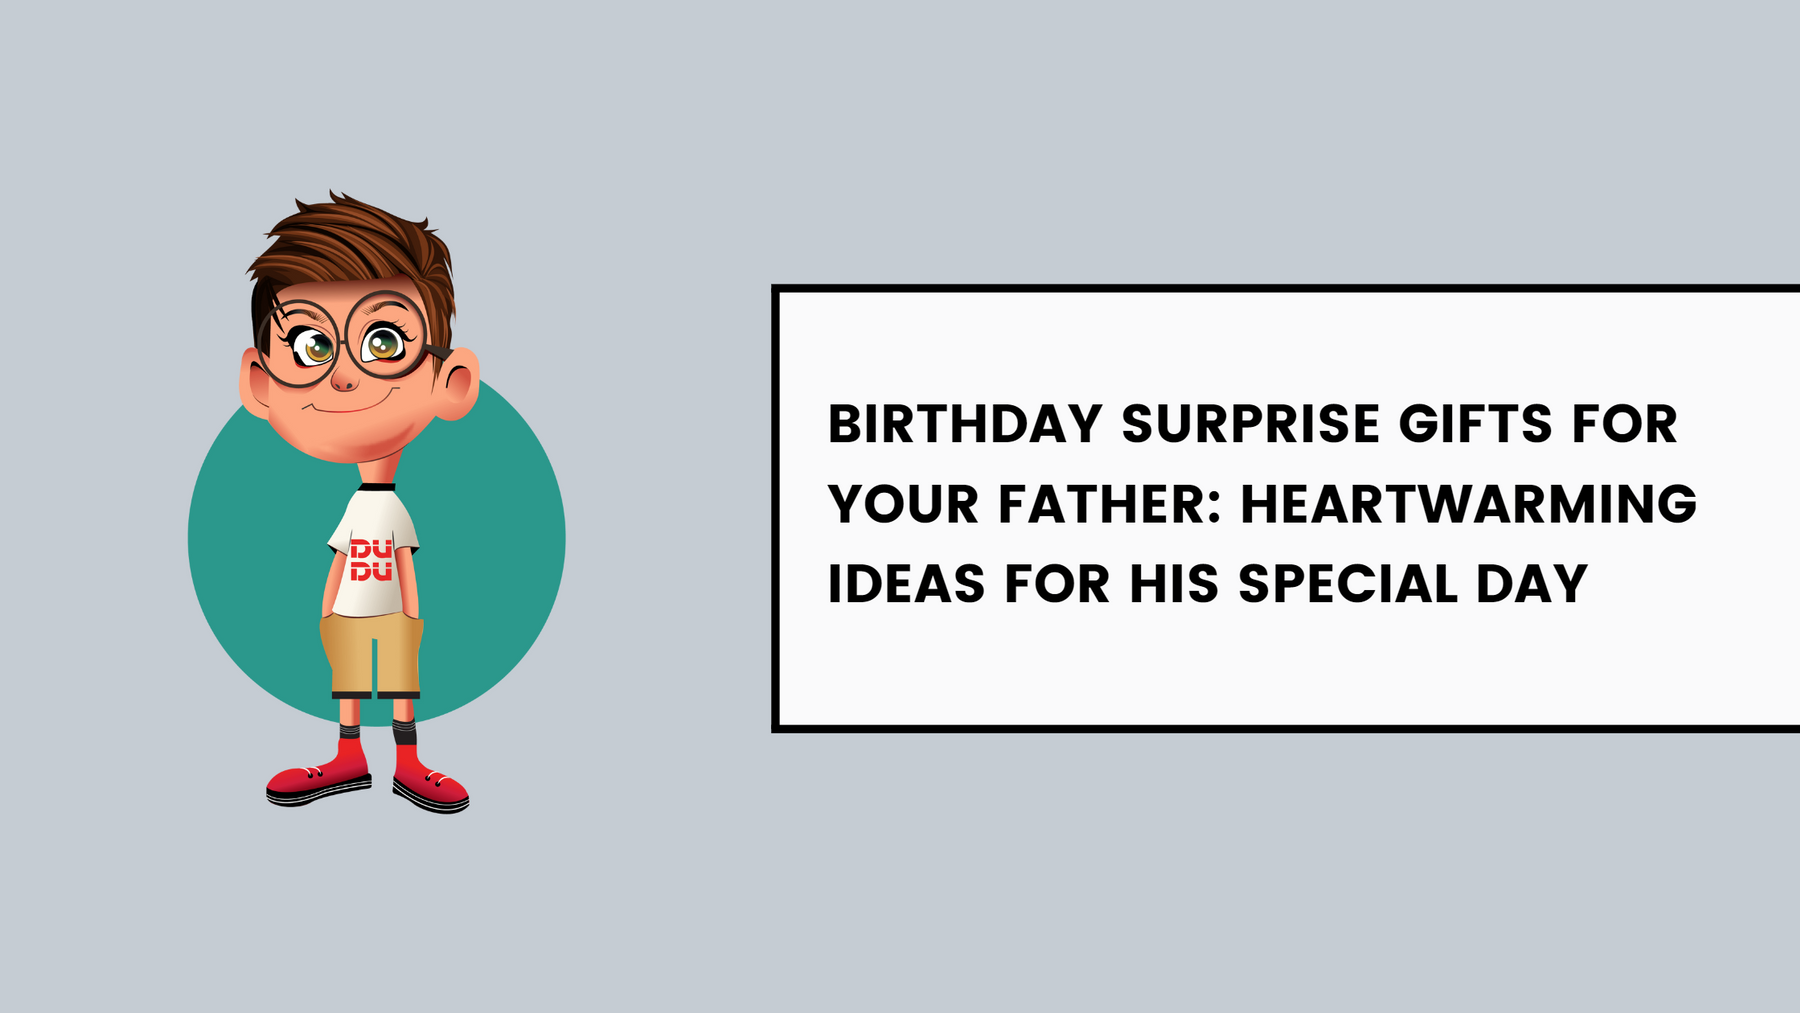 Birthday Surprise Gifts For Your Father: Heartwarming Ideas For His Special Day